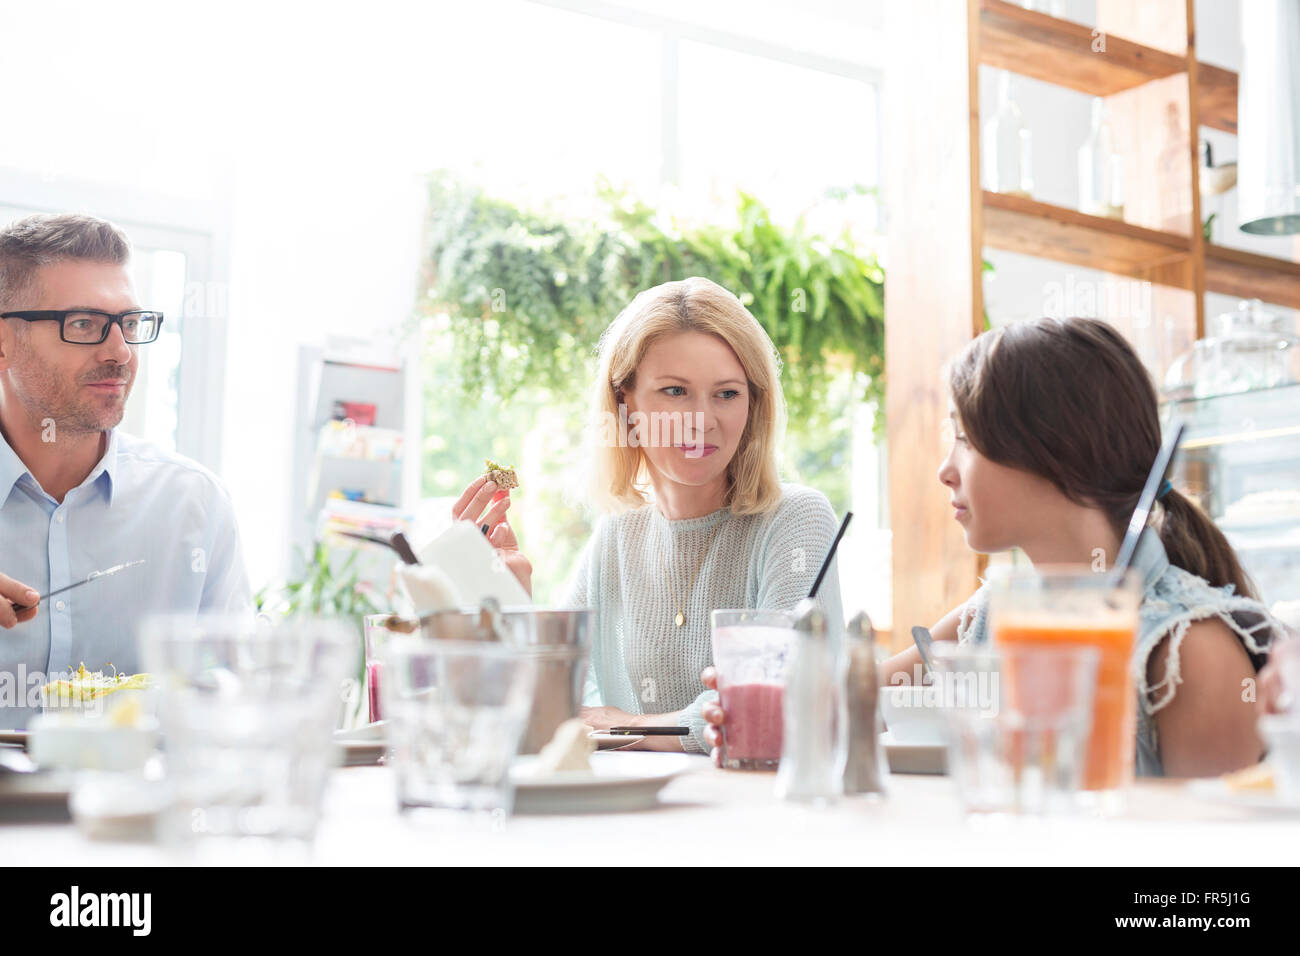 Family eating lunch at cafe table Stock Photo